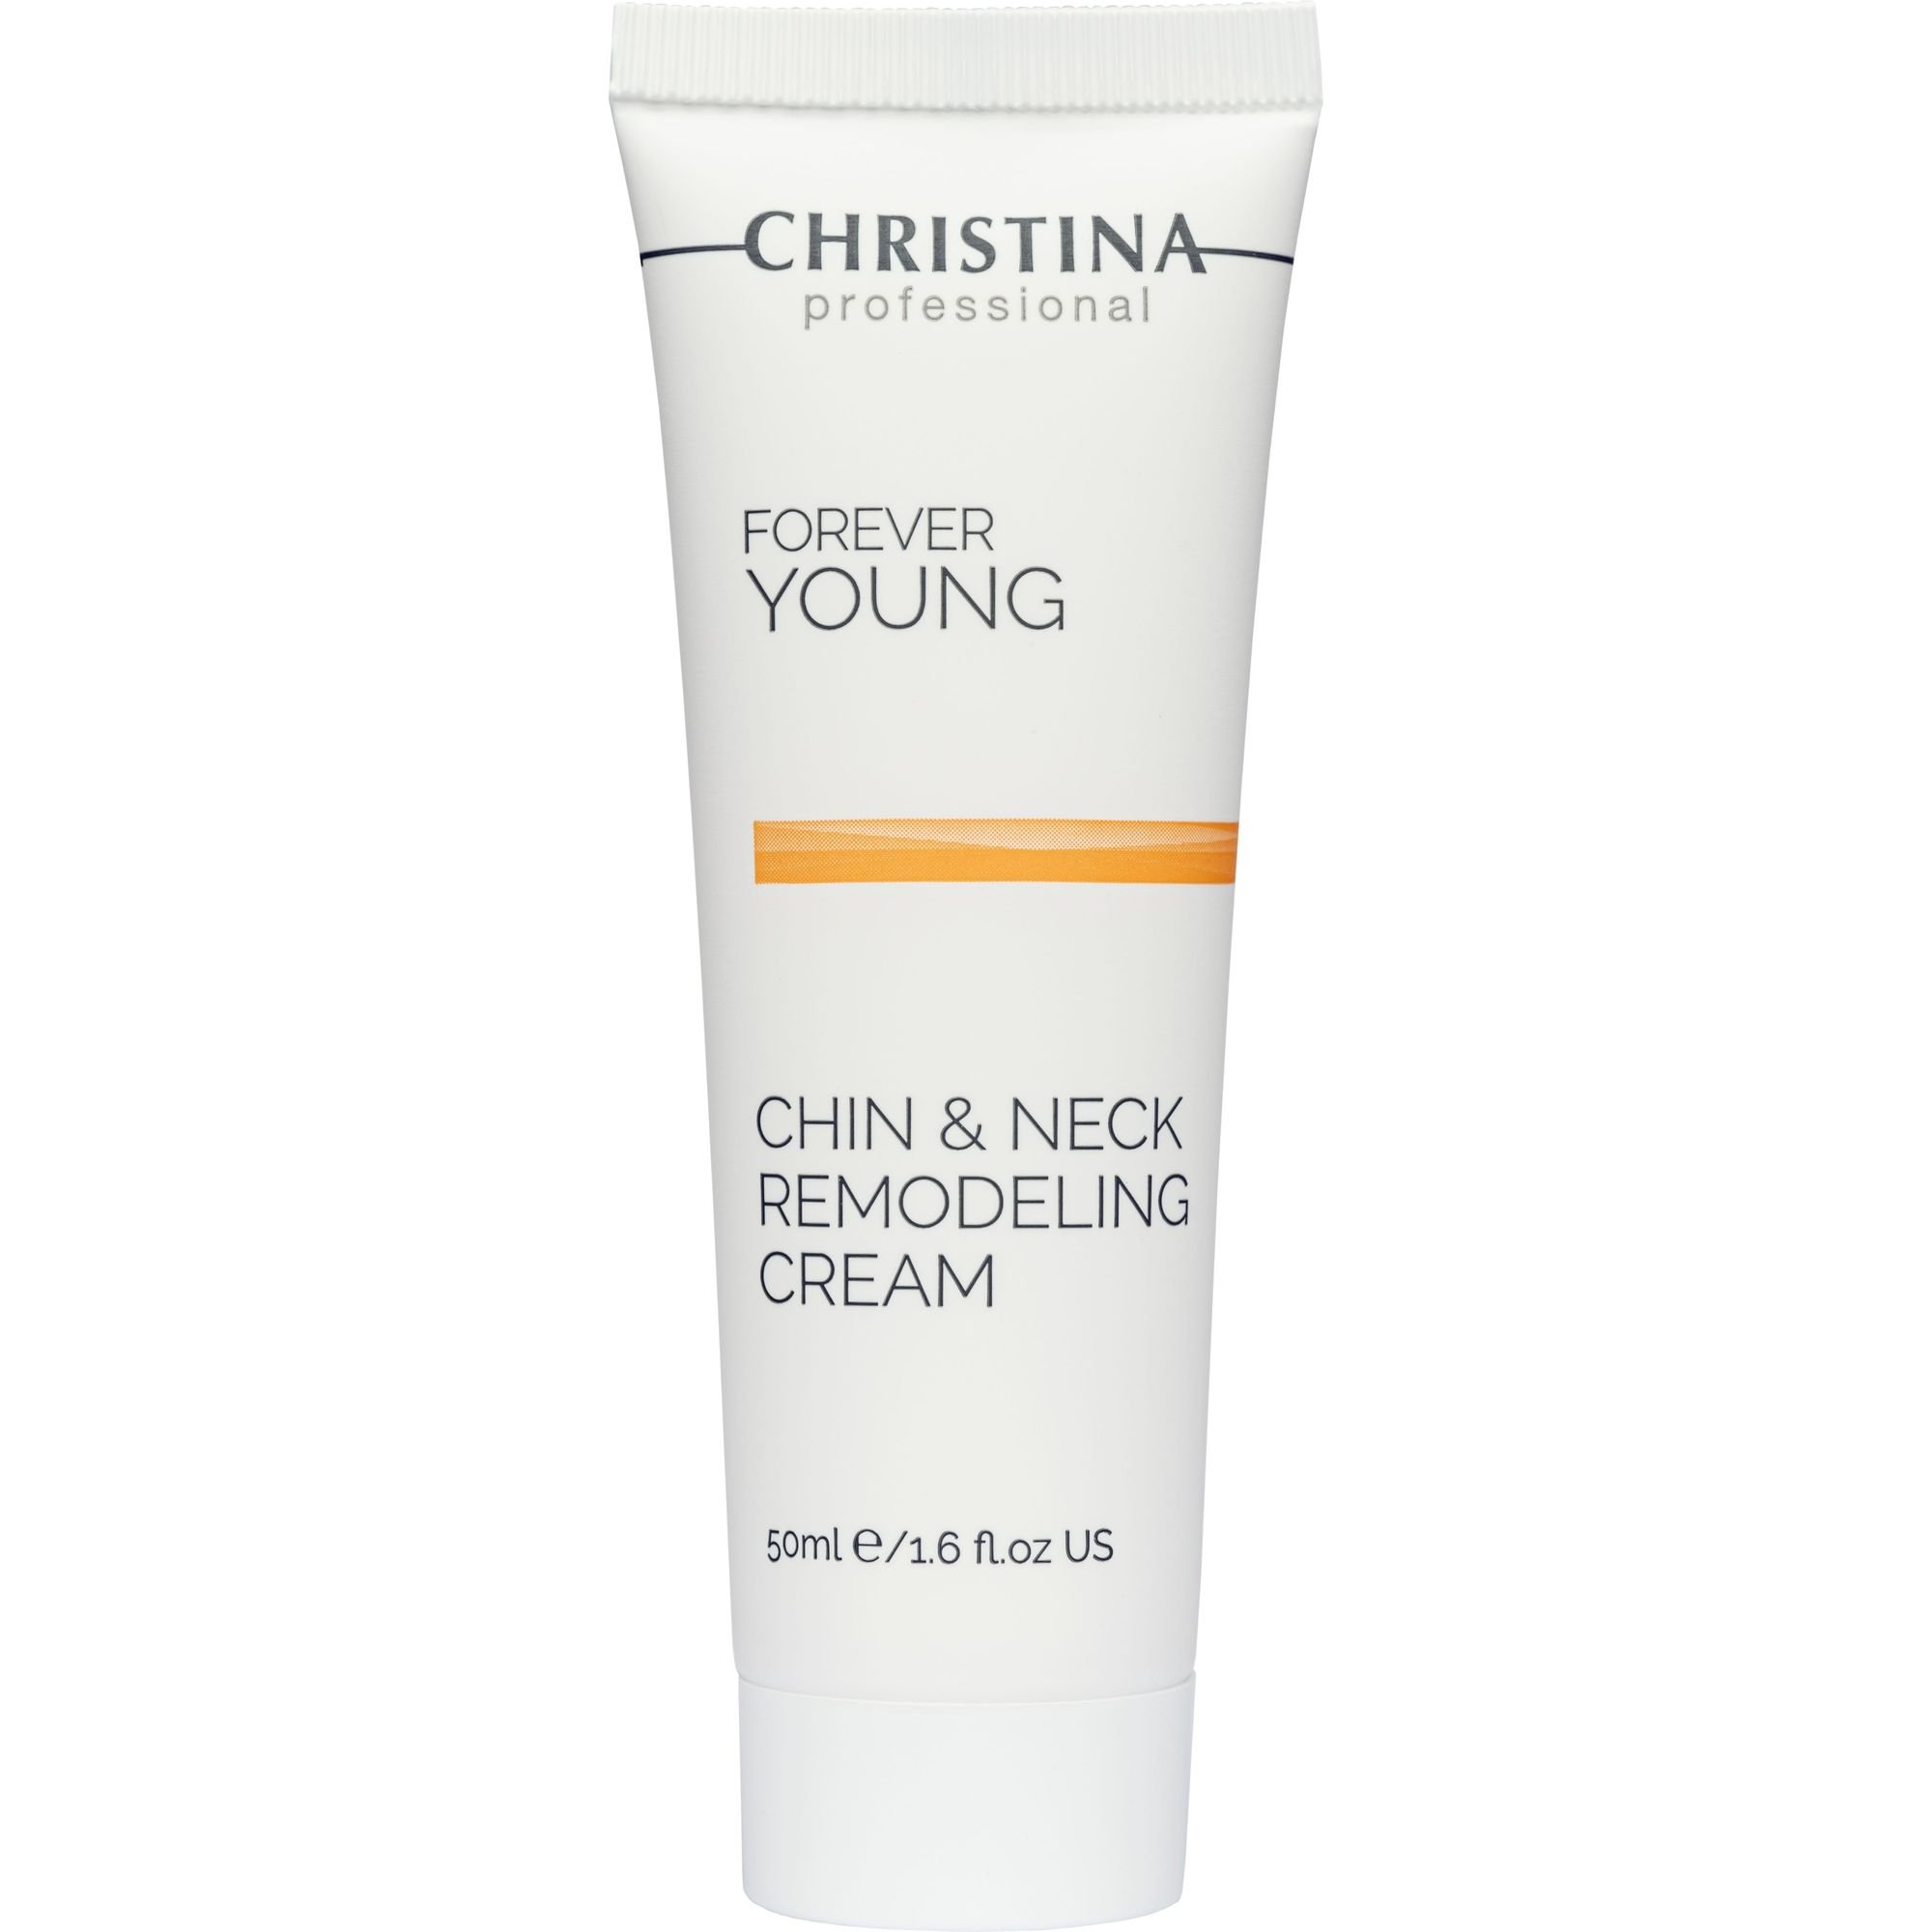 Набір Christina Forever Young Absolute Contour Kit: Absolute Contour Serum 30 мл + 3Luronic Serum 30 мл + Chin & Neck Remodeling Cream 50 мл - фото 6